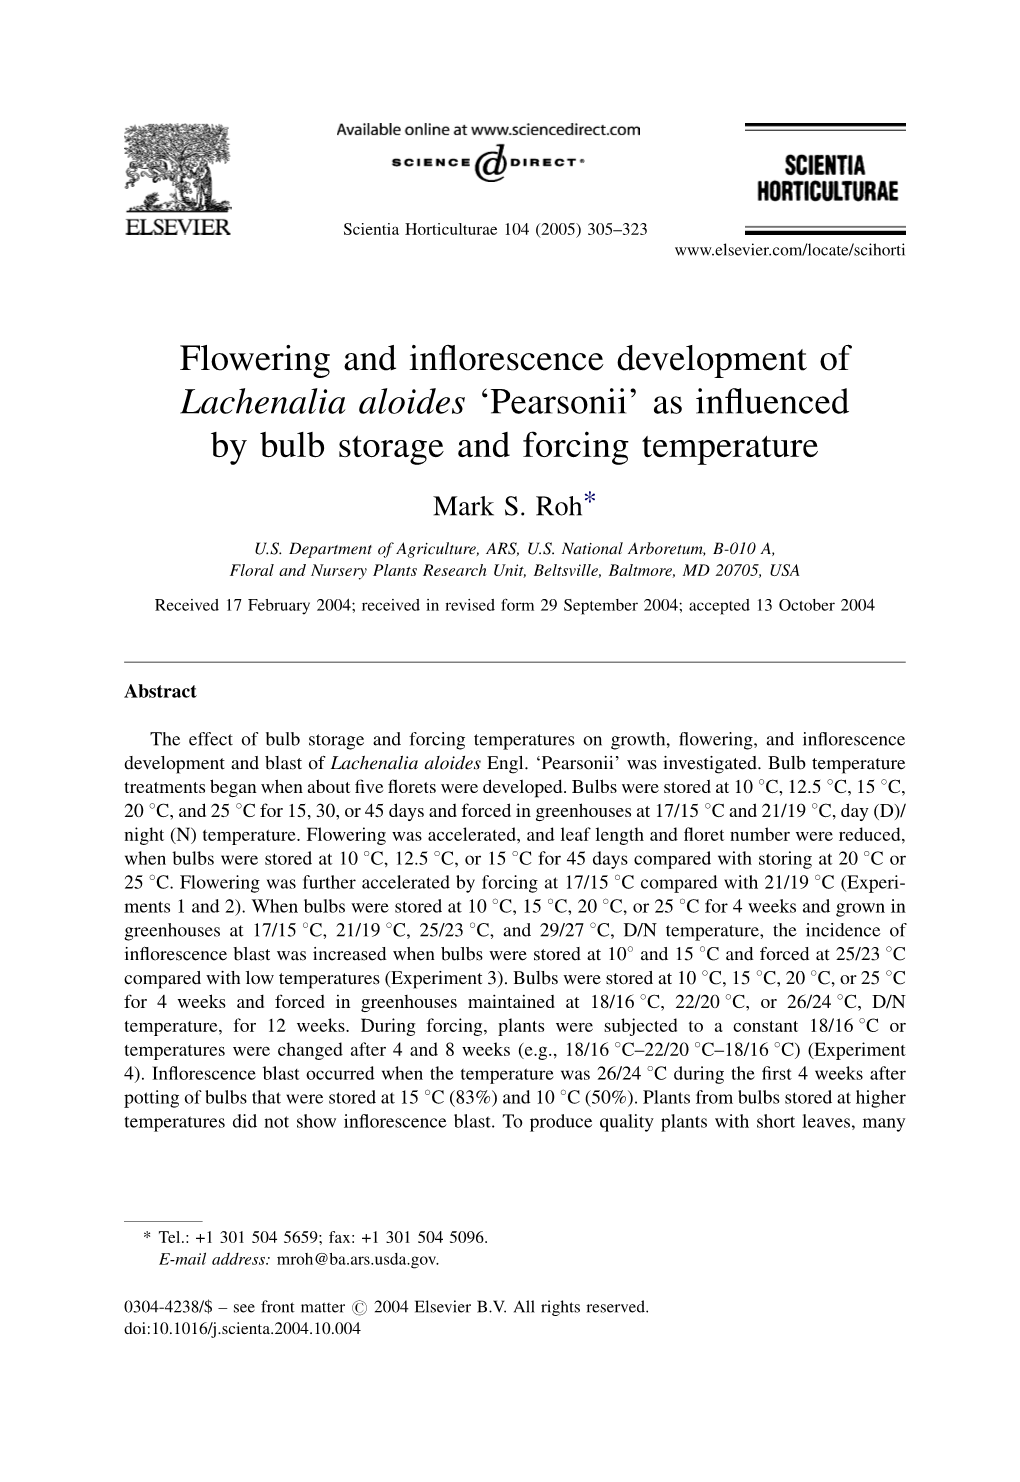 Flowering and Inflorescence Development of Lachenalia Aloides